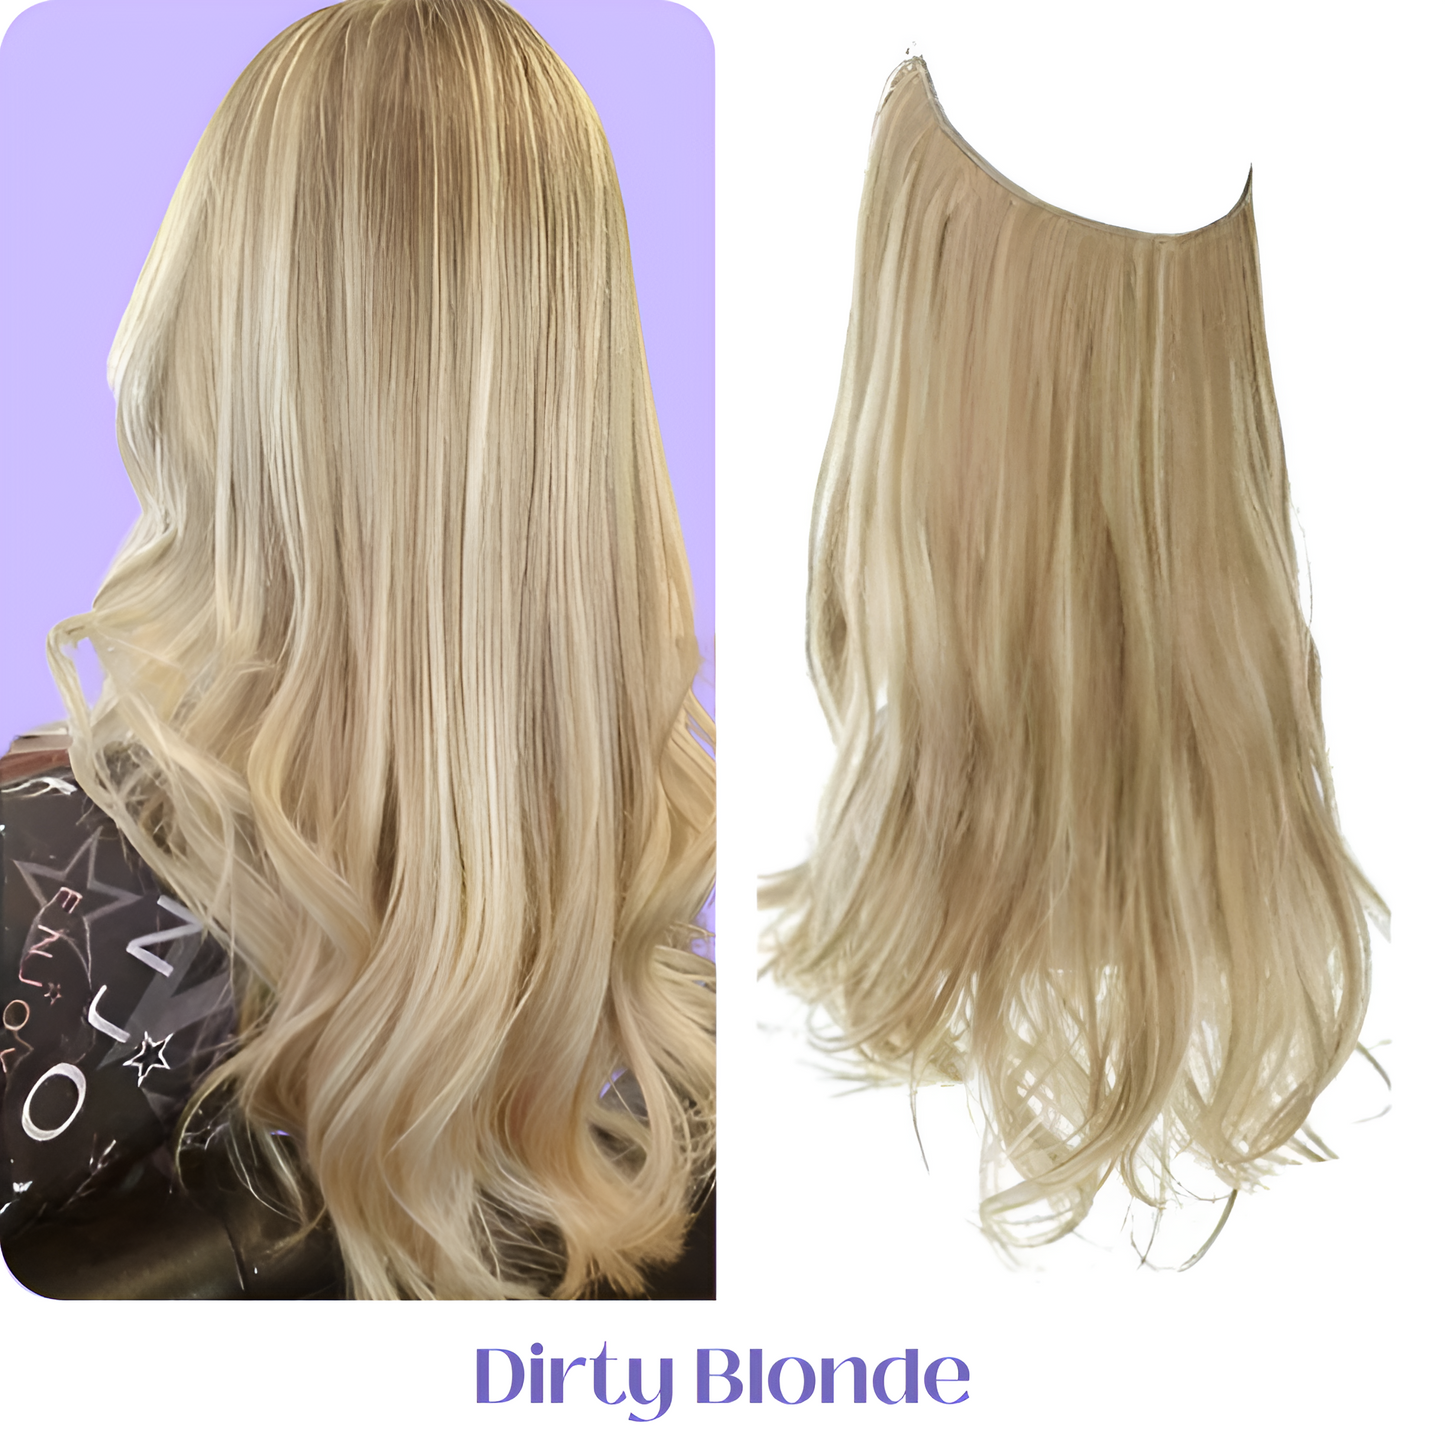 Haluxy's Hair Extensions | Get your dream hair today!